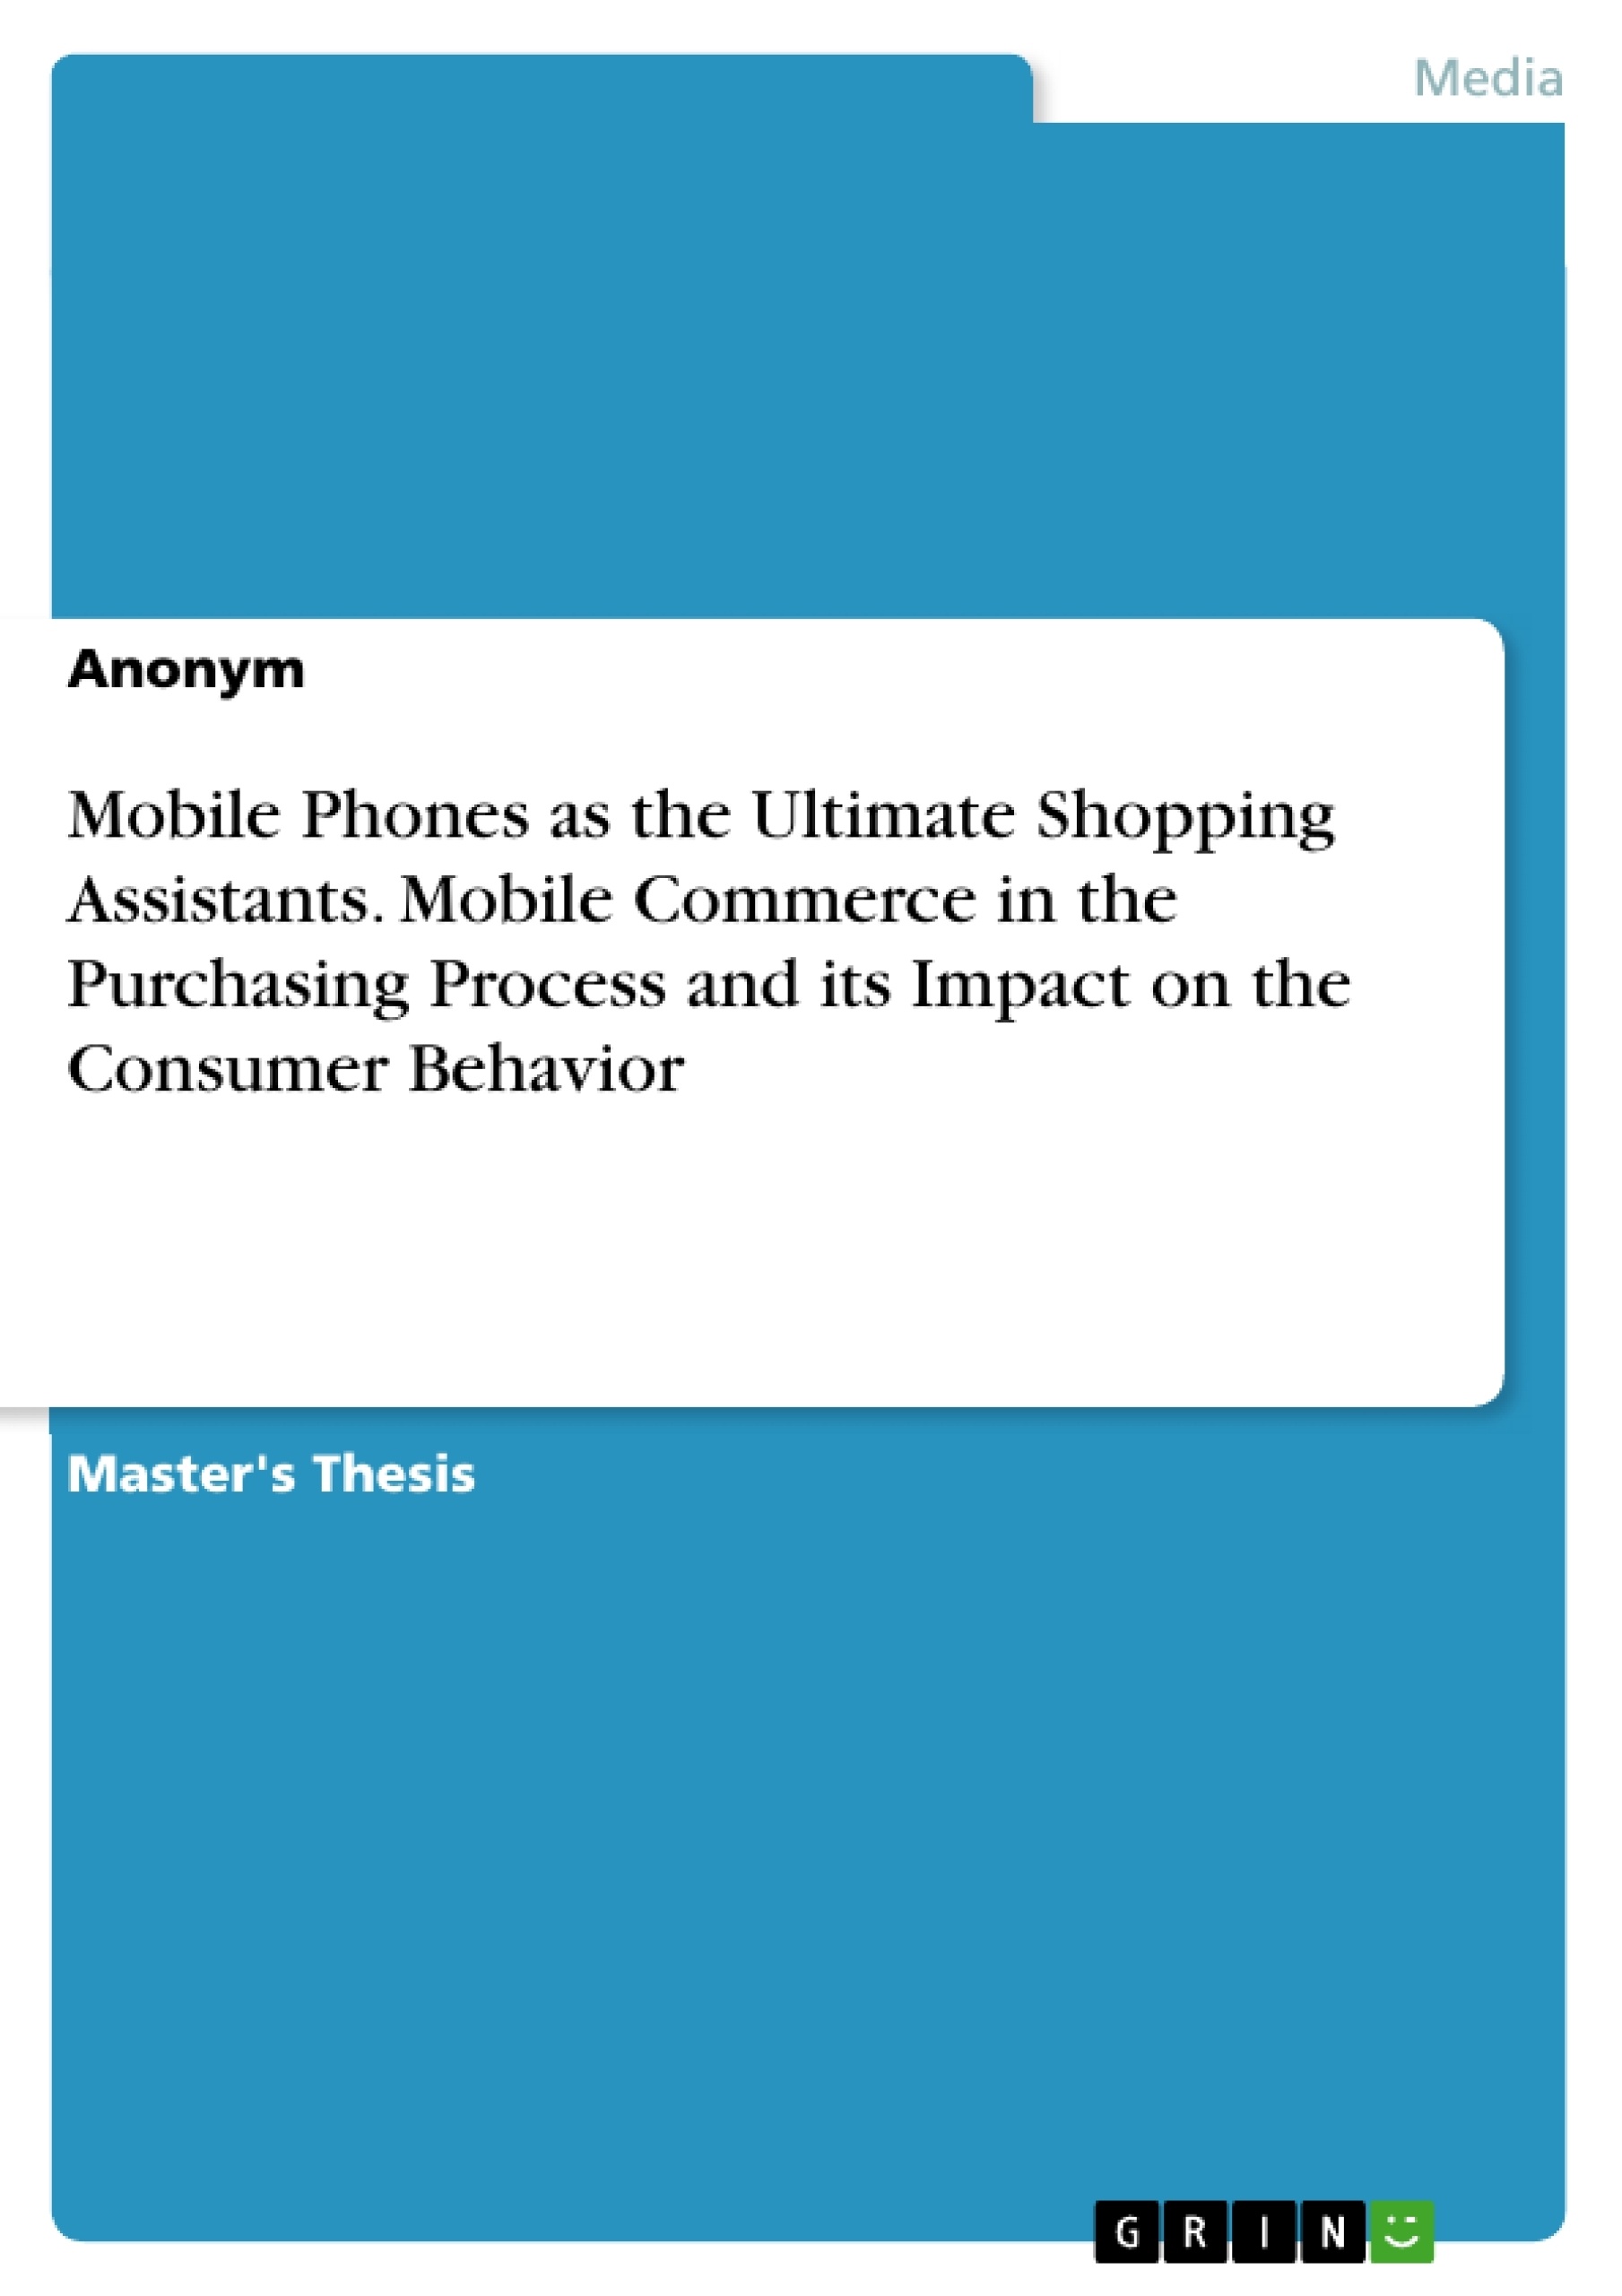 Impact　Ultimate　and　Mobile　Behavior　Shopping　Process　Purchasing　Commerce　Mobile　the　the　the　its　as　Phones　GRIN　Assistants.　in　on　Consumer